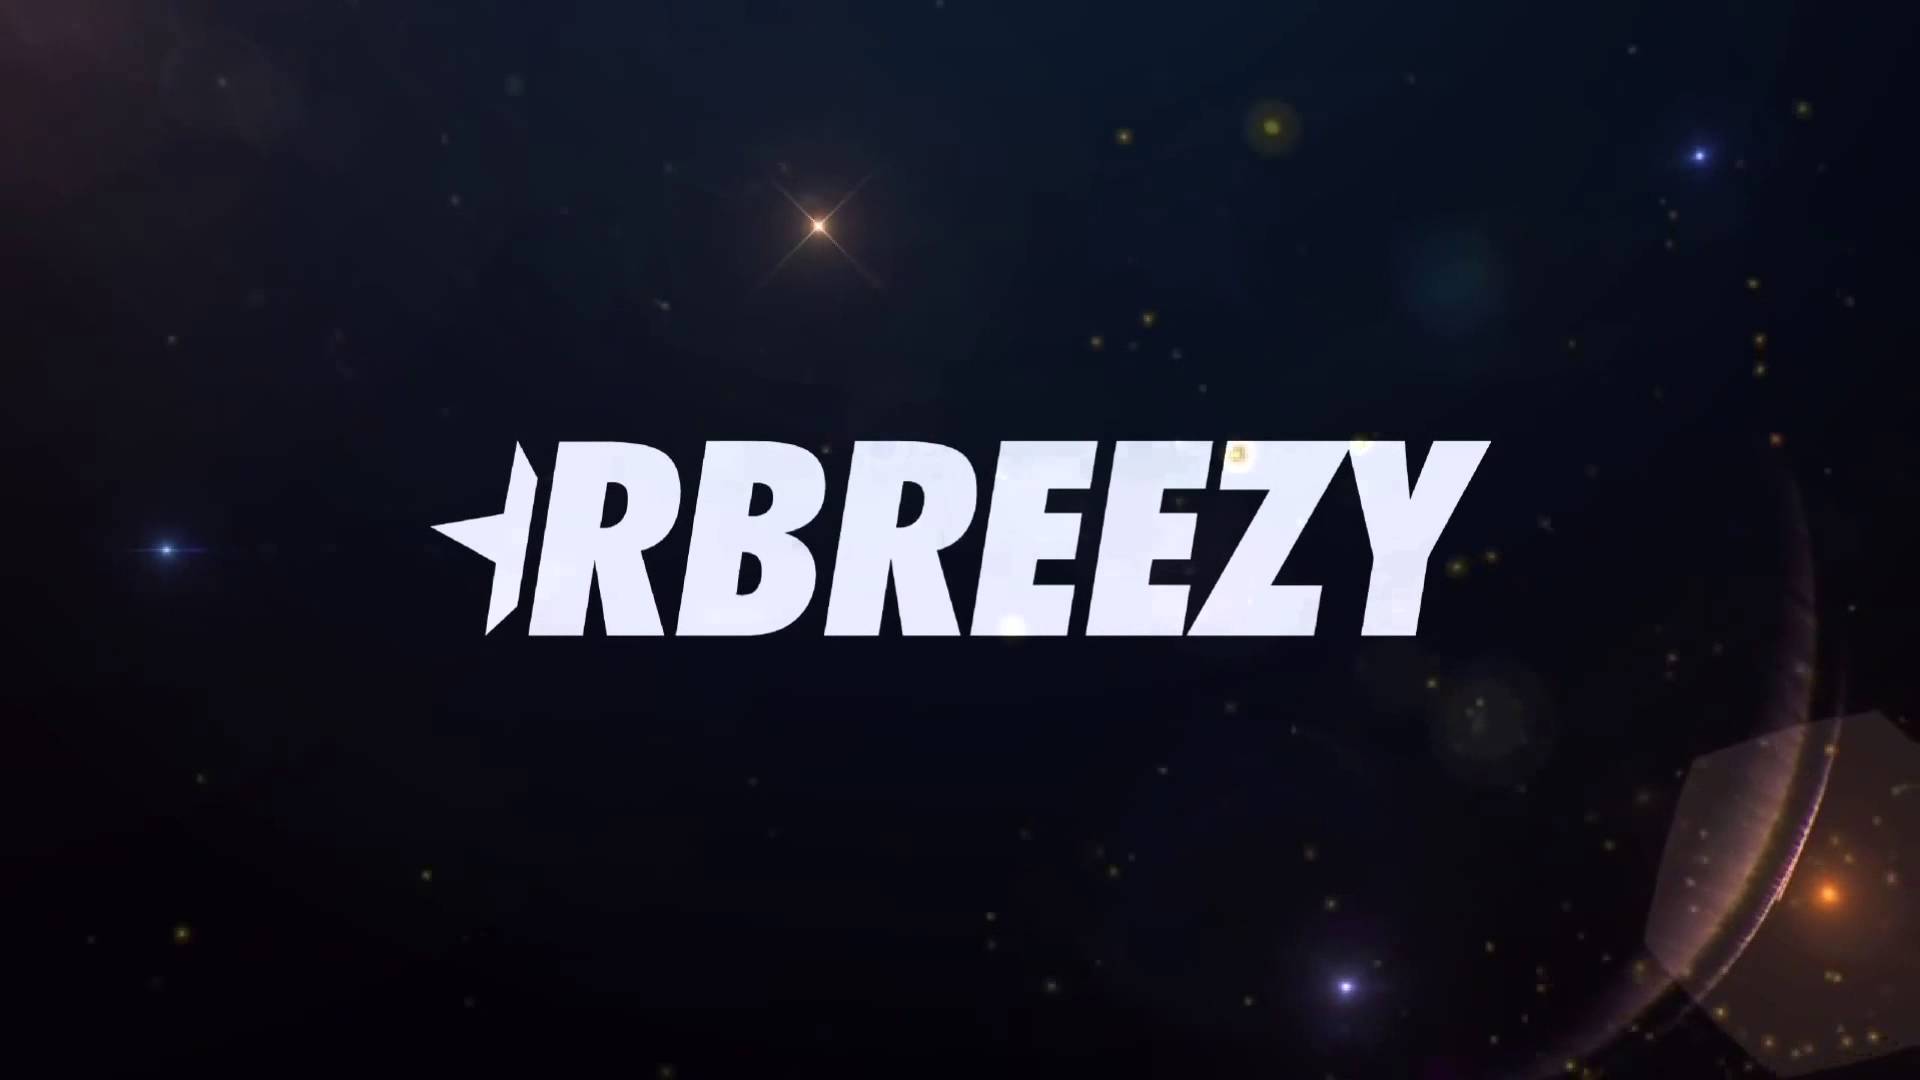 The Ntc Is Pretty Much Powerless Against Rbreezy - R Breezy Font , HD Wallpaper & Backgrounds